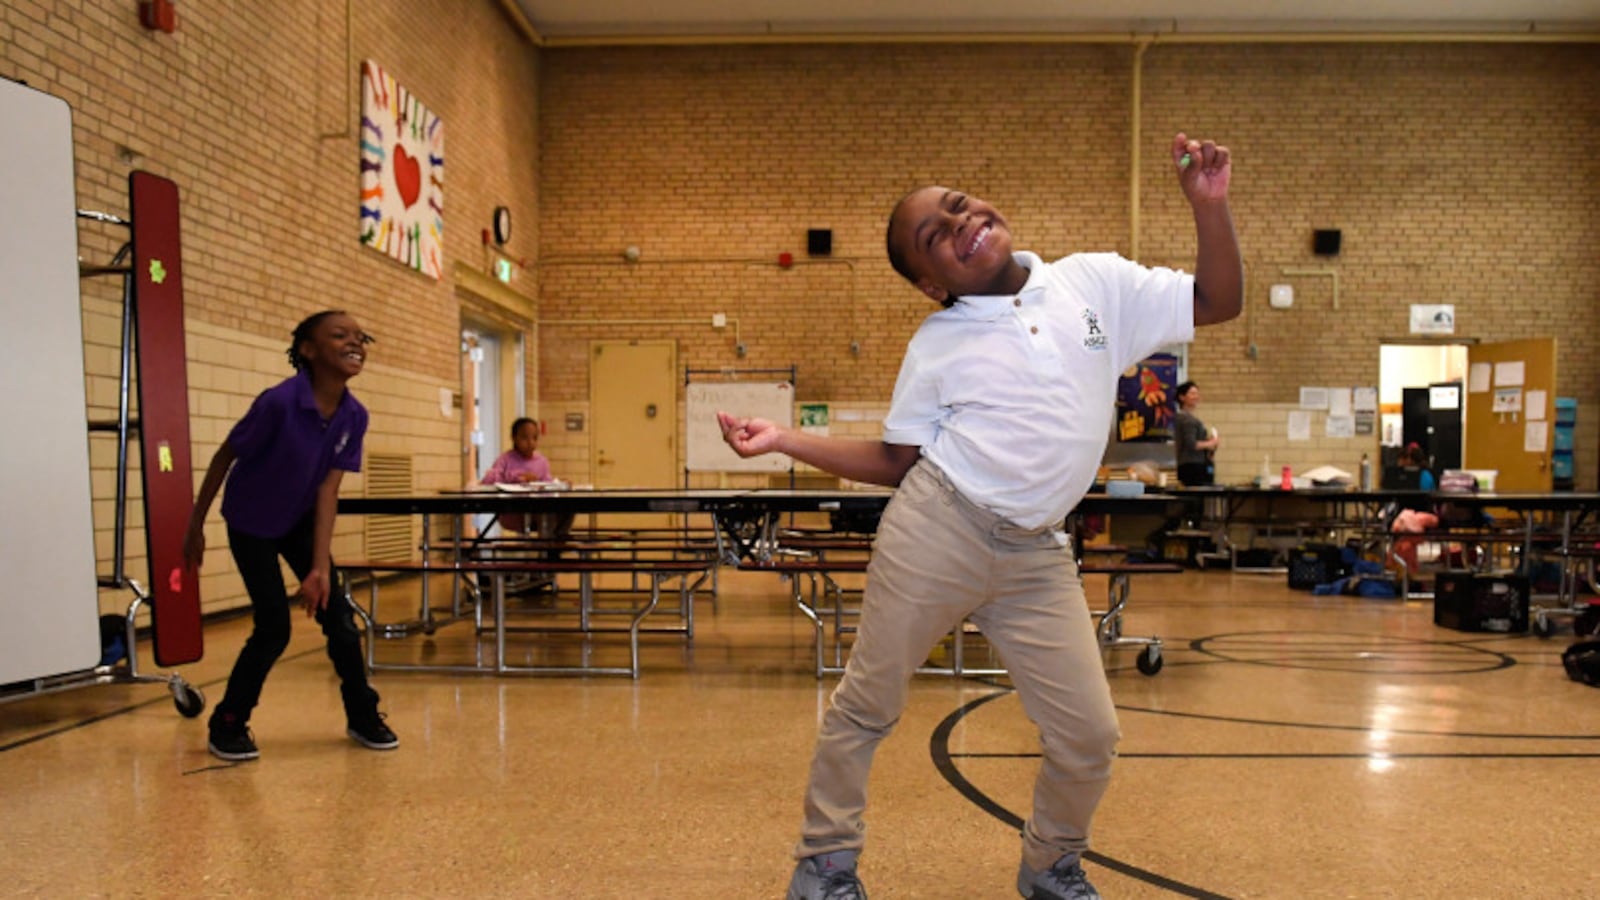 Hannah Moore, 8, shows off her moves during practice for an after school talent show that is part of the Scholars Unlimited After School program at Ashley Elementary school on March 10, 2017 in Denver, Colorado. Scholars Unlimited is an after school and summer program funded by the 21st Century Community Learning Center Grant, which is threatened to be cut entirely under the White House's budget cuts. The 21st Century Community Learning Center Grant served almost 20,000 students in Colorado betw